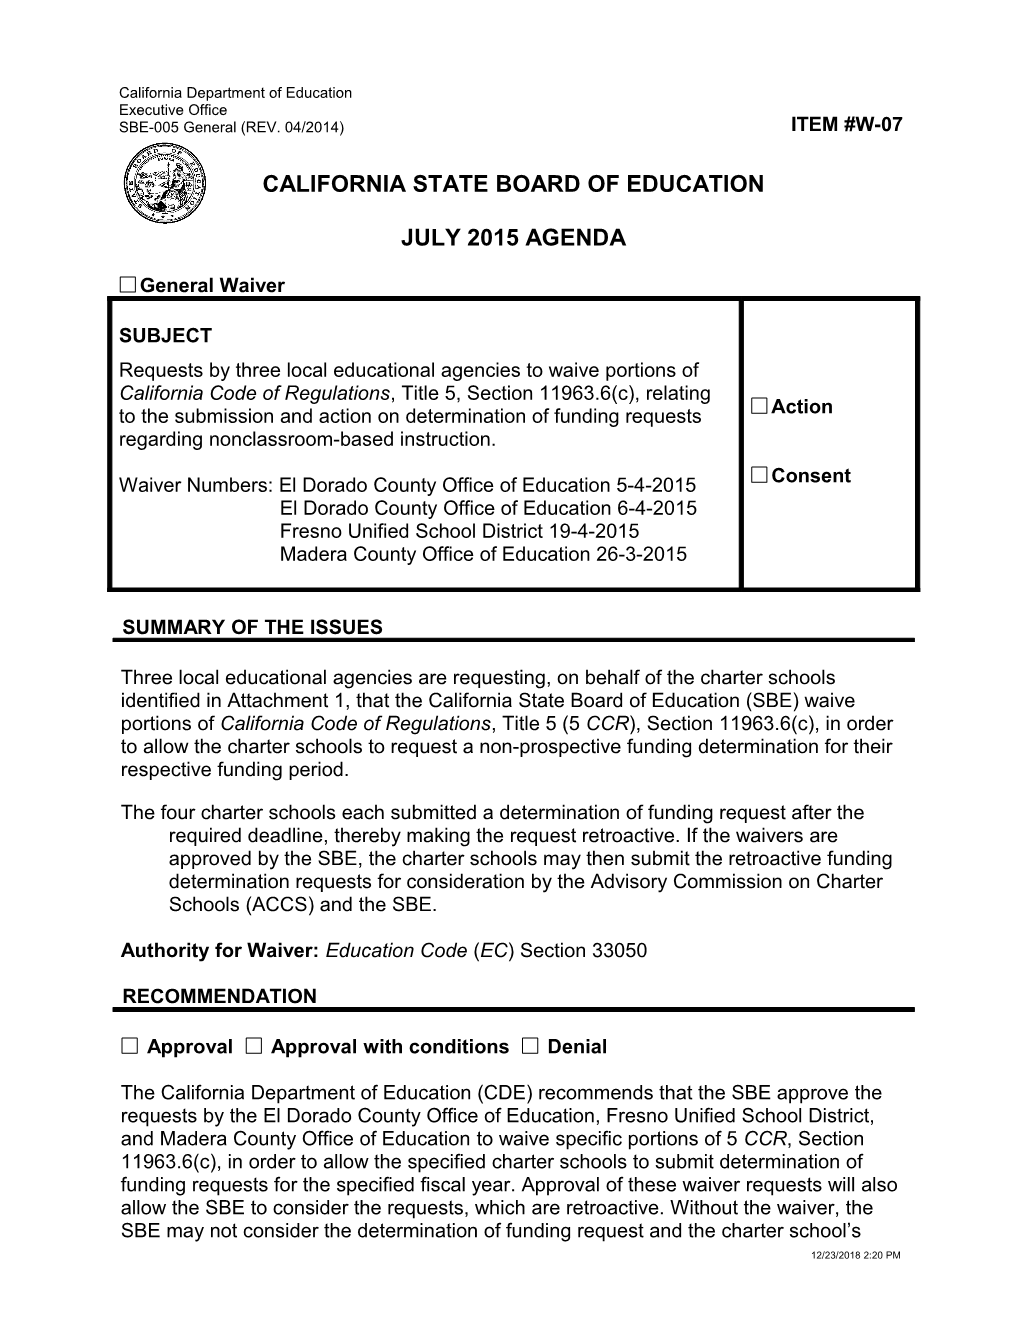 July 2015 Waiver Item W-07 - Meeting Agendas (CA State Board of Education)